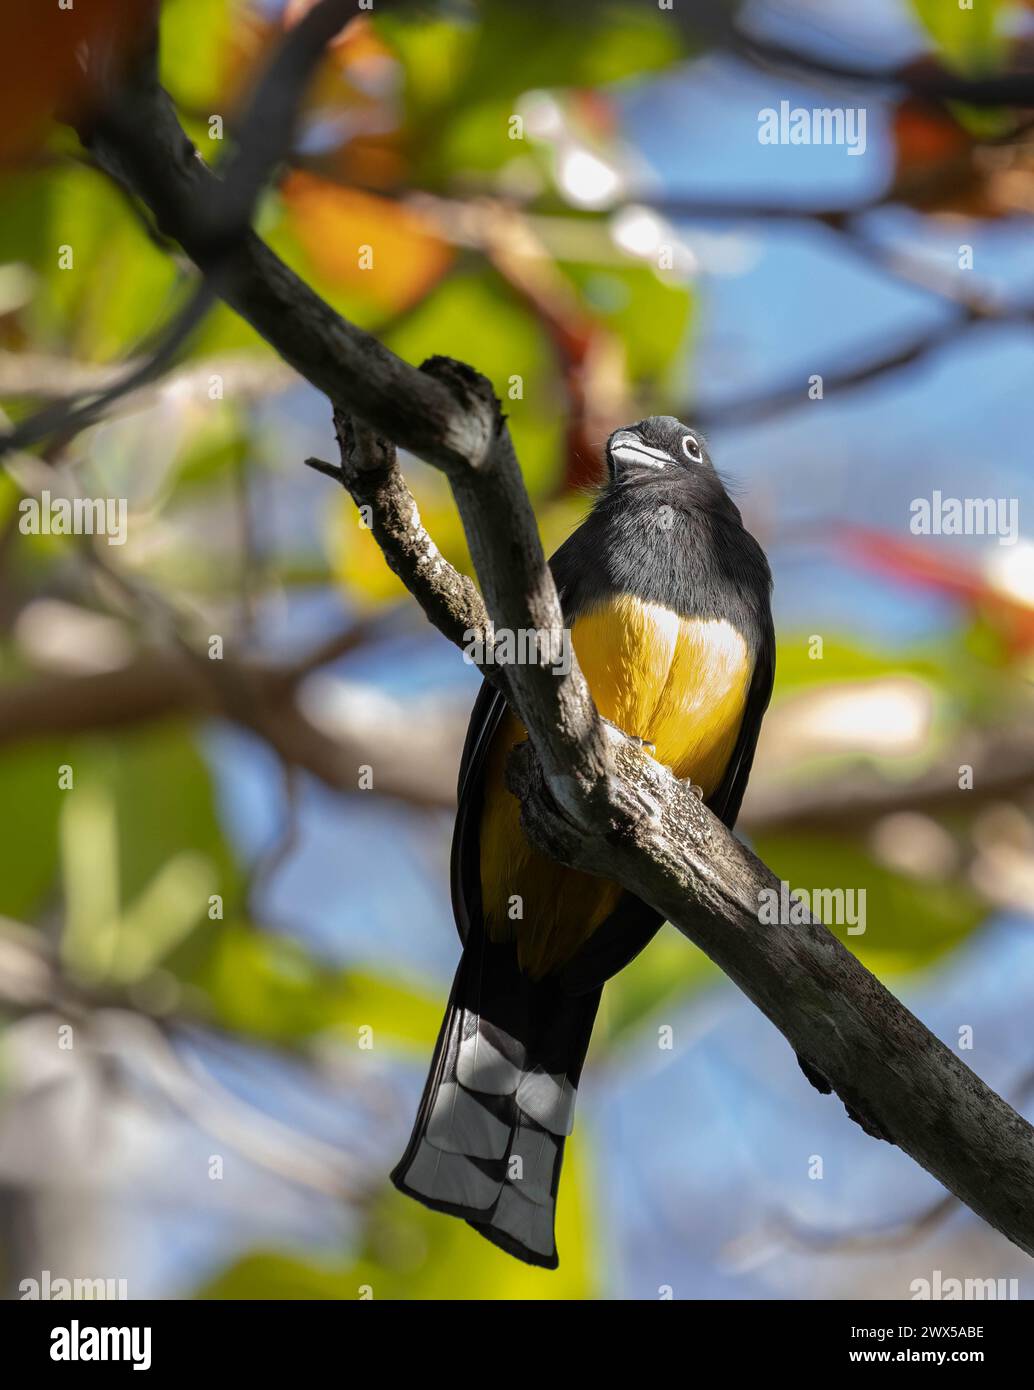 Front closeup view of a black-headed trogon in a tree with colourful background in Costa Rica Stock Photo